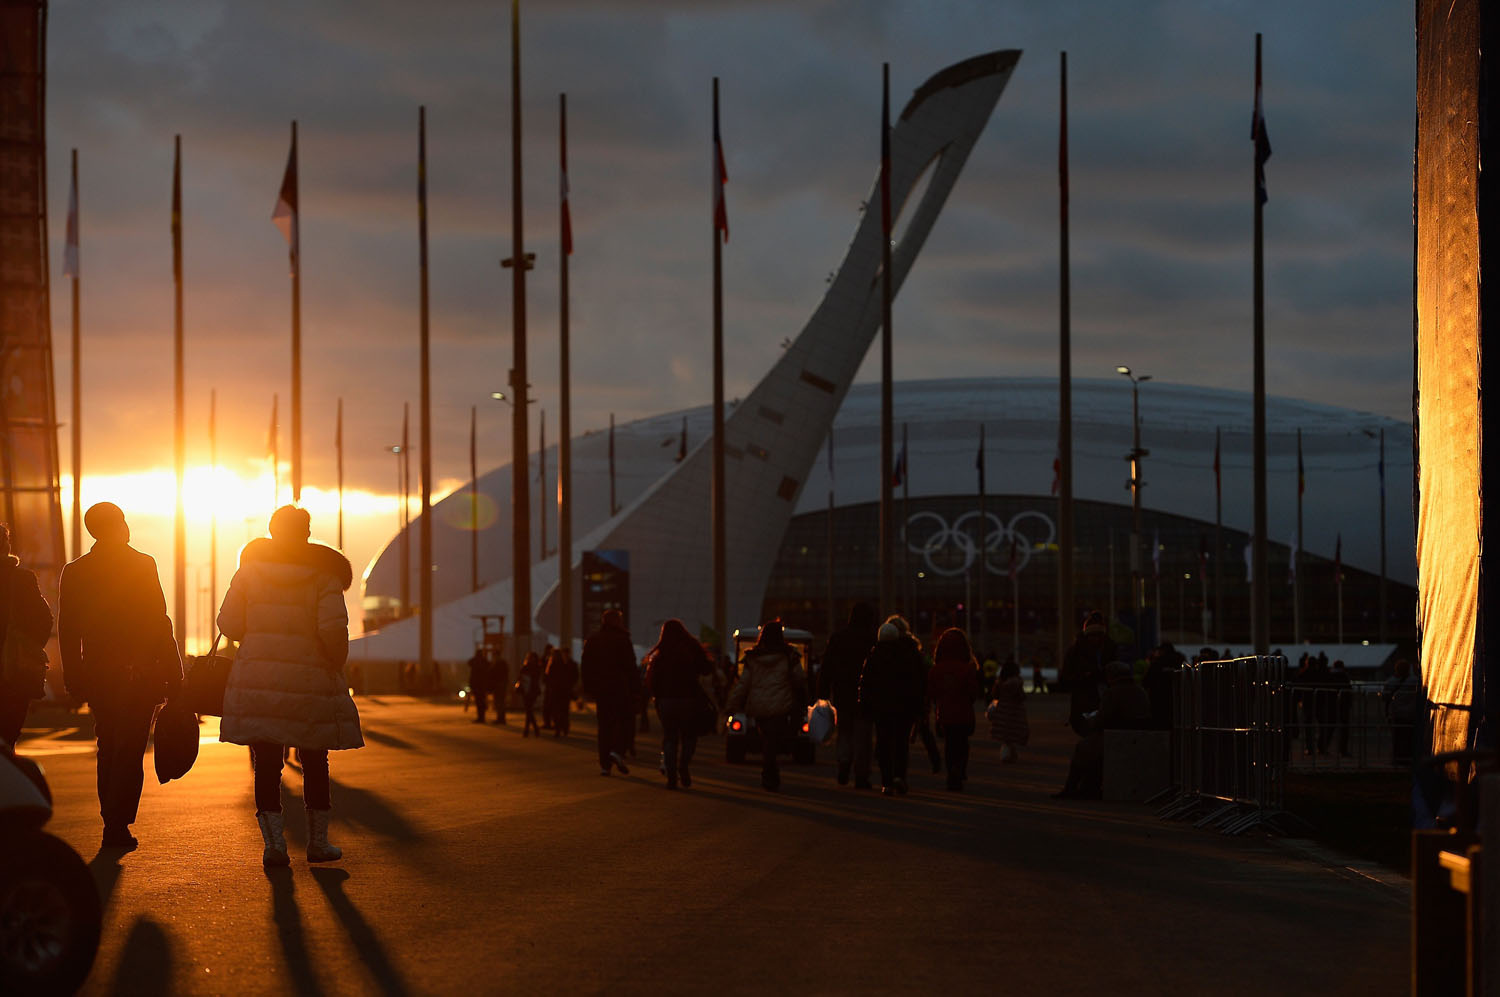 Visitors walk inside the Olympic Park prior to the Sochi 2014 Winter Olympics on February 6, 2014.